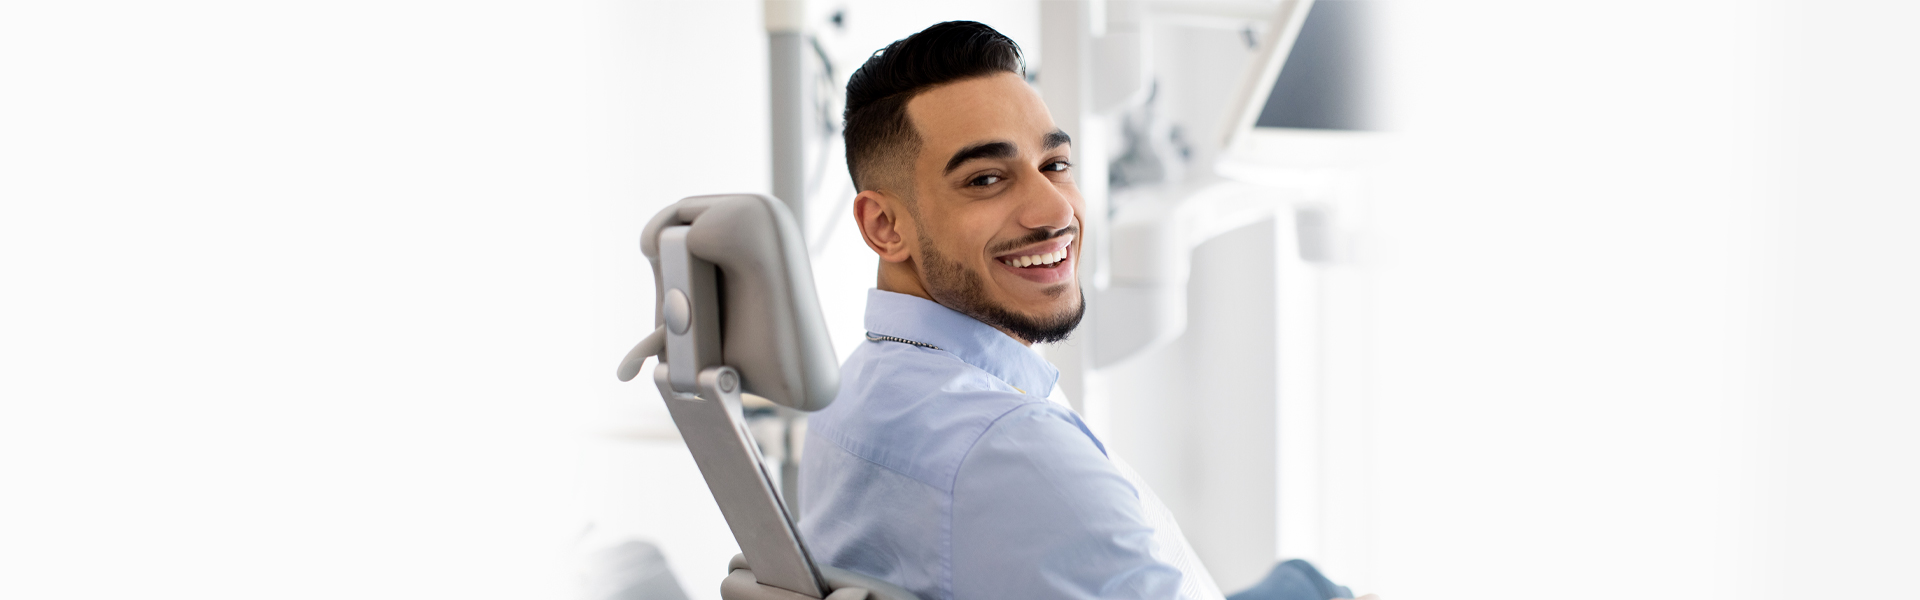 Endodontics (Root Canal Treatment) Therapy in St Petersburg, FL